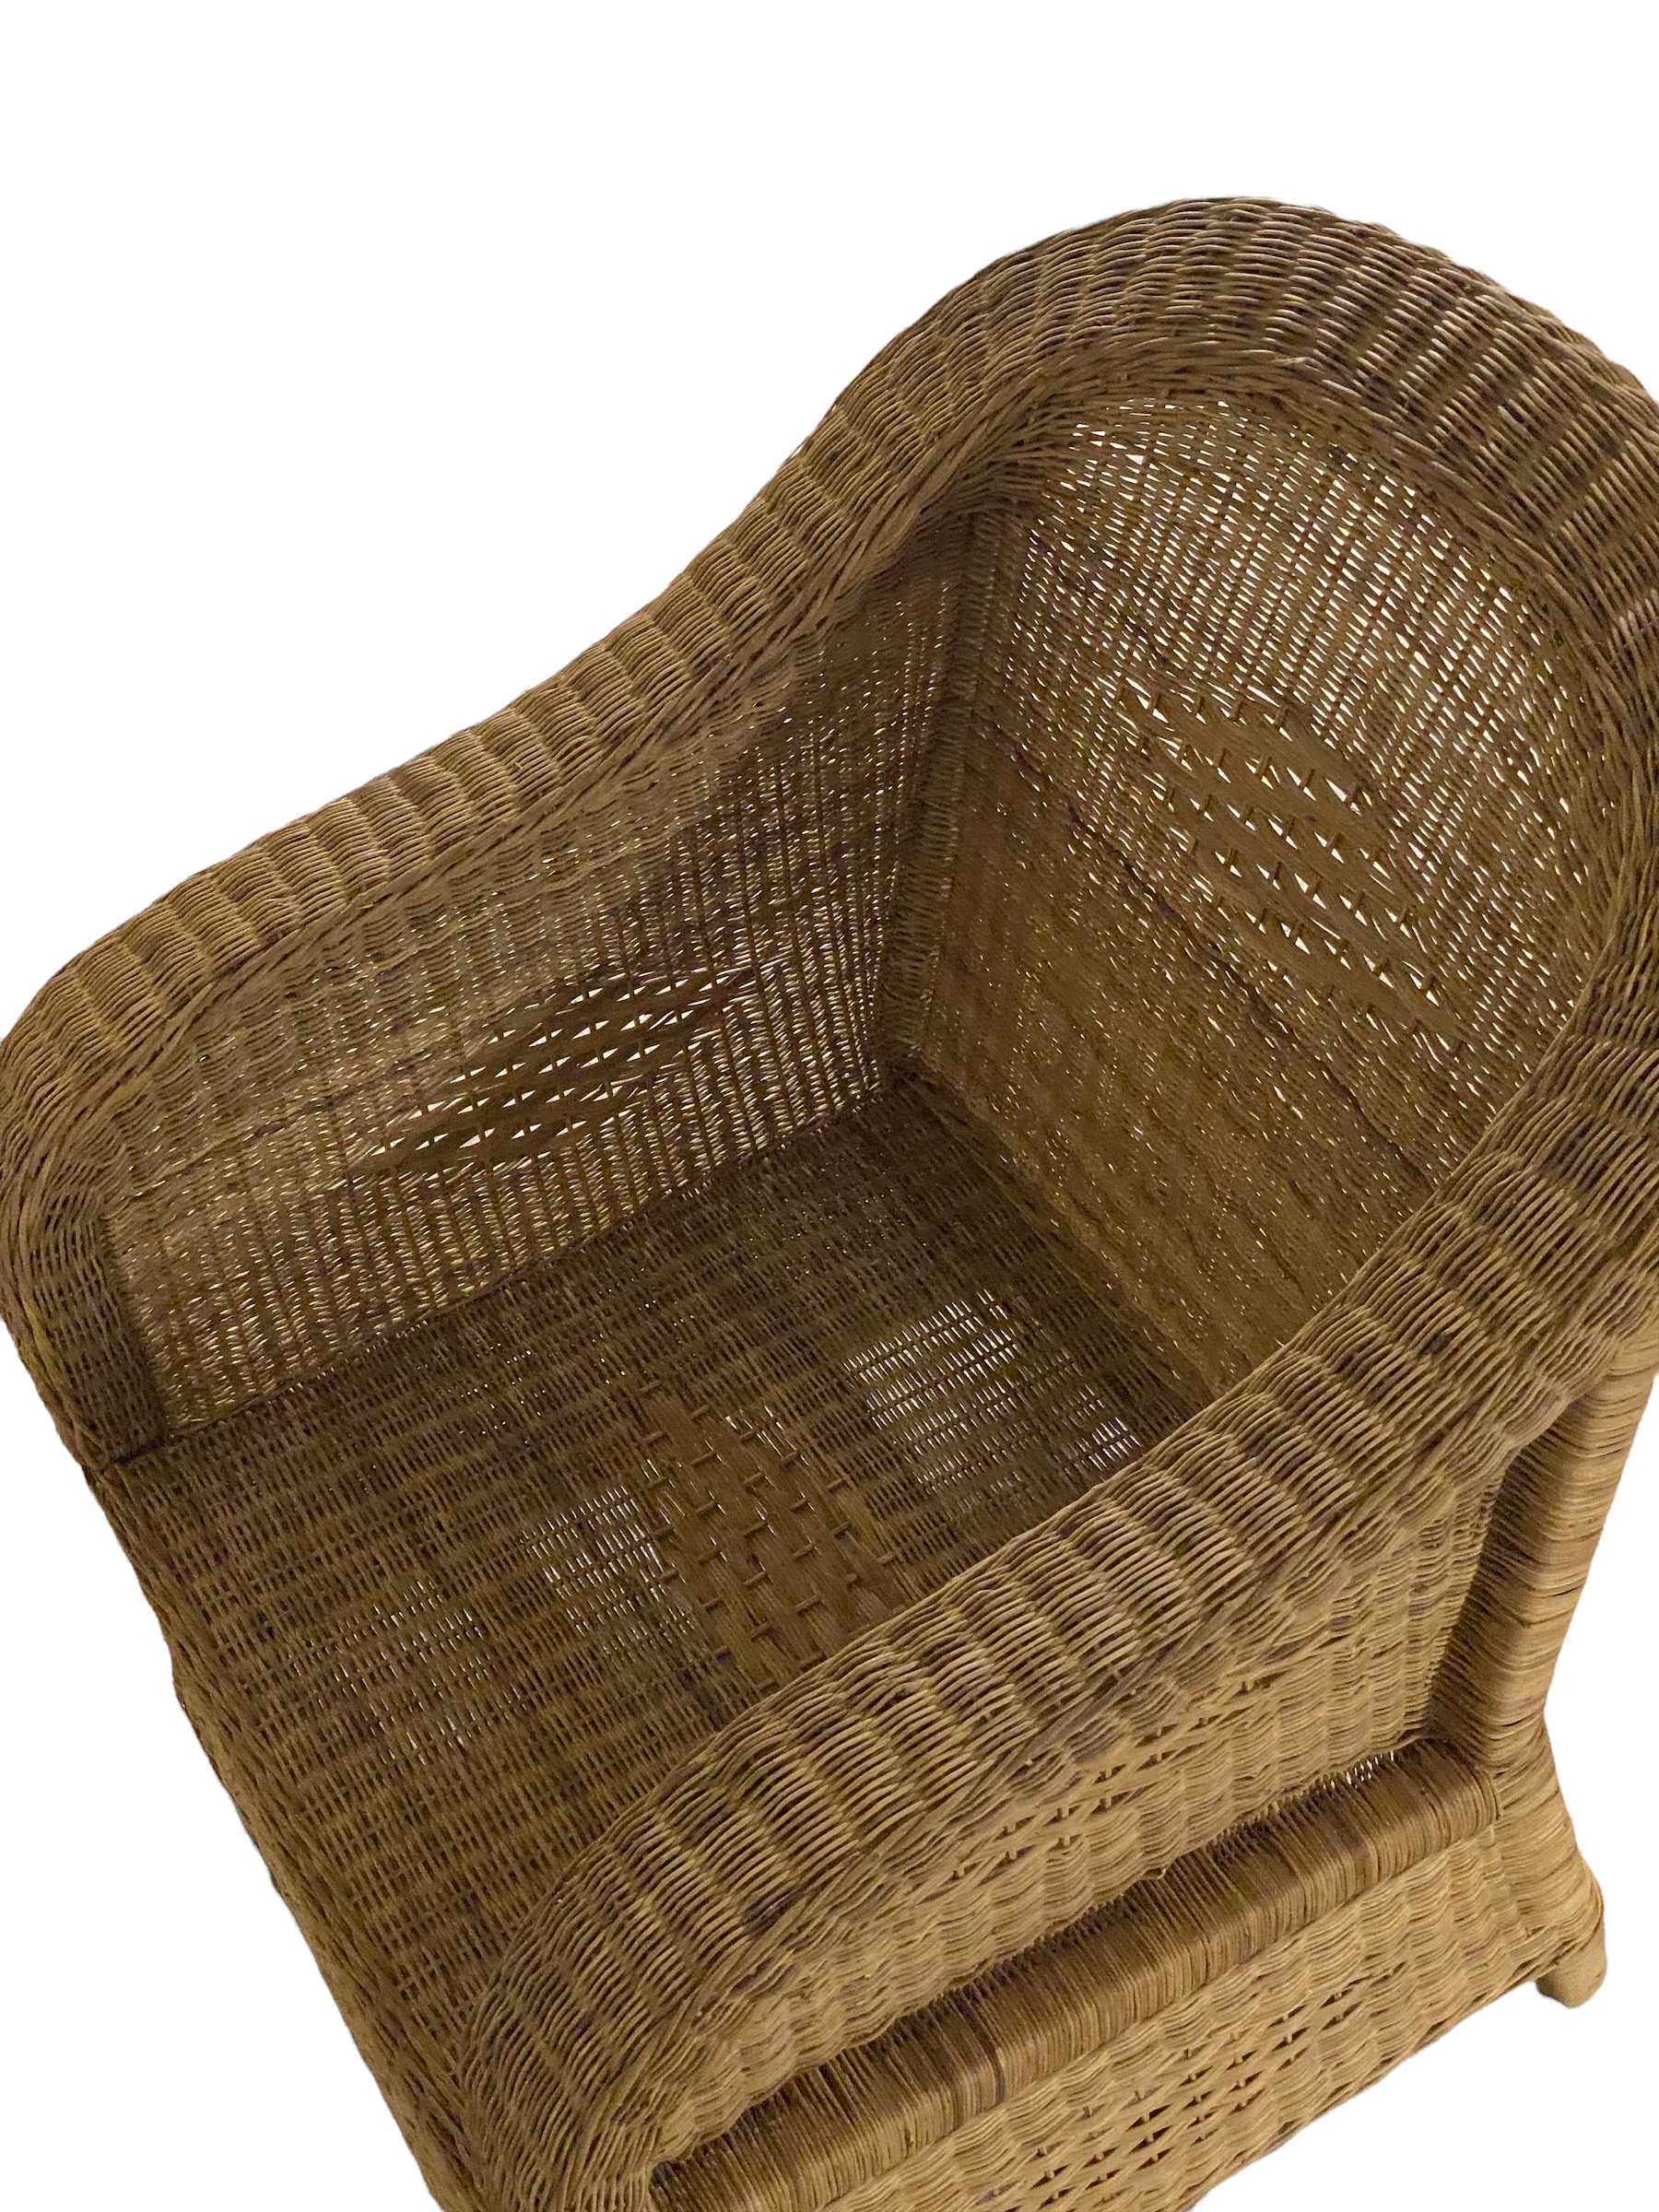 Double Woven Malawi Chair